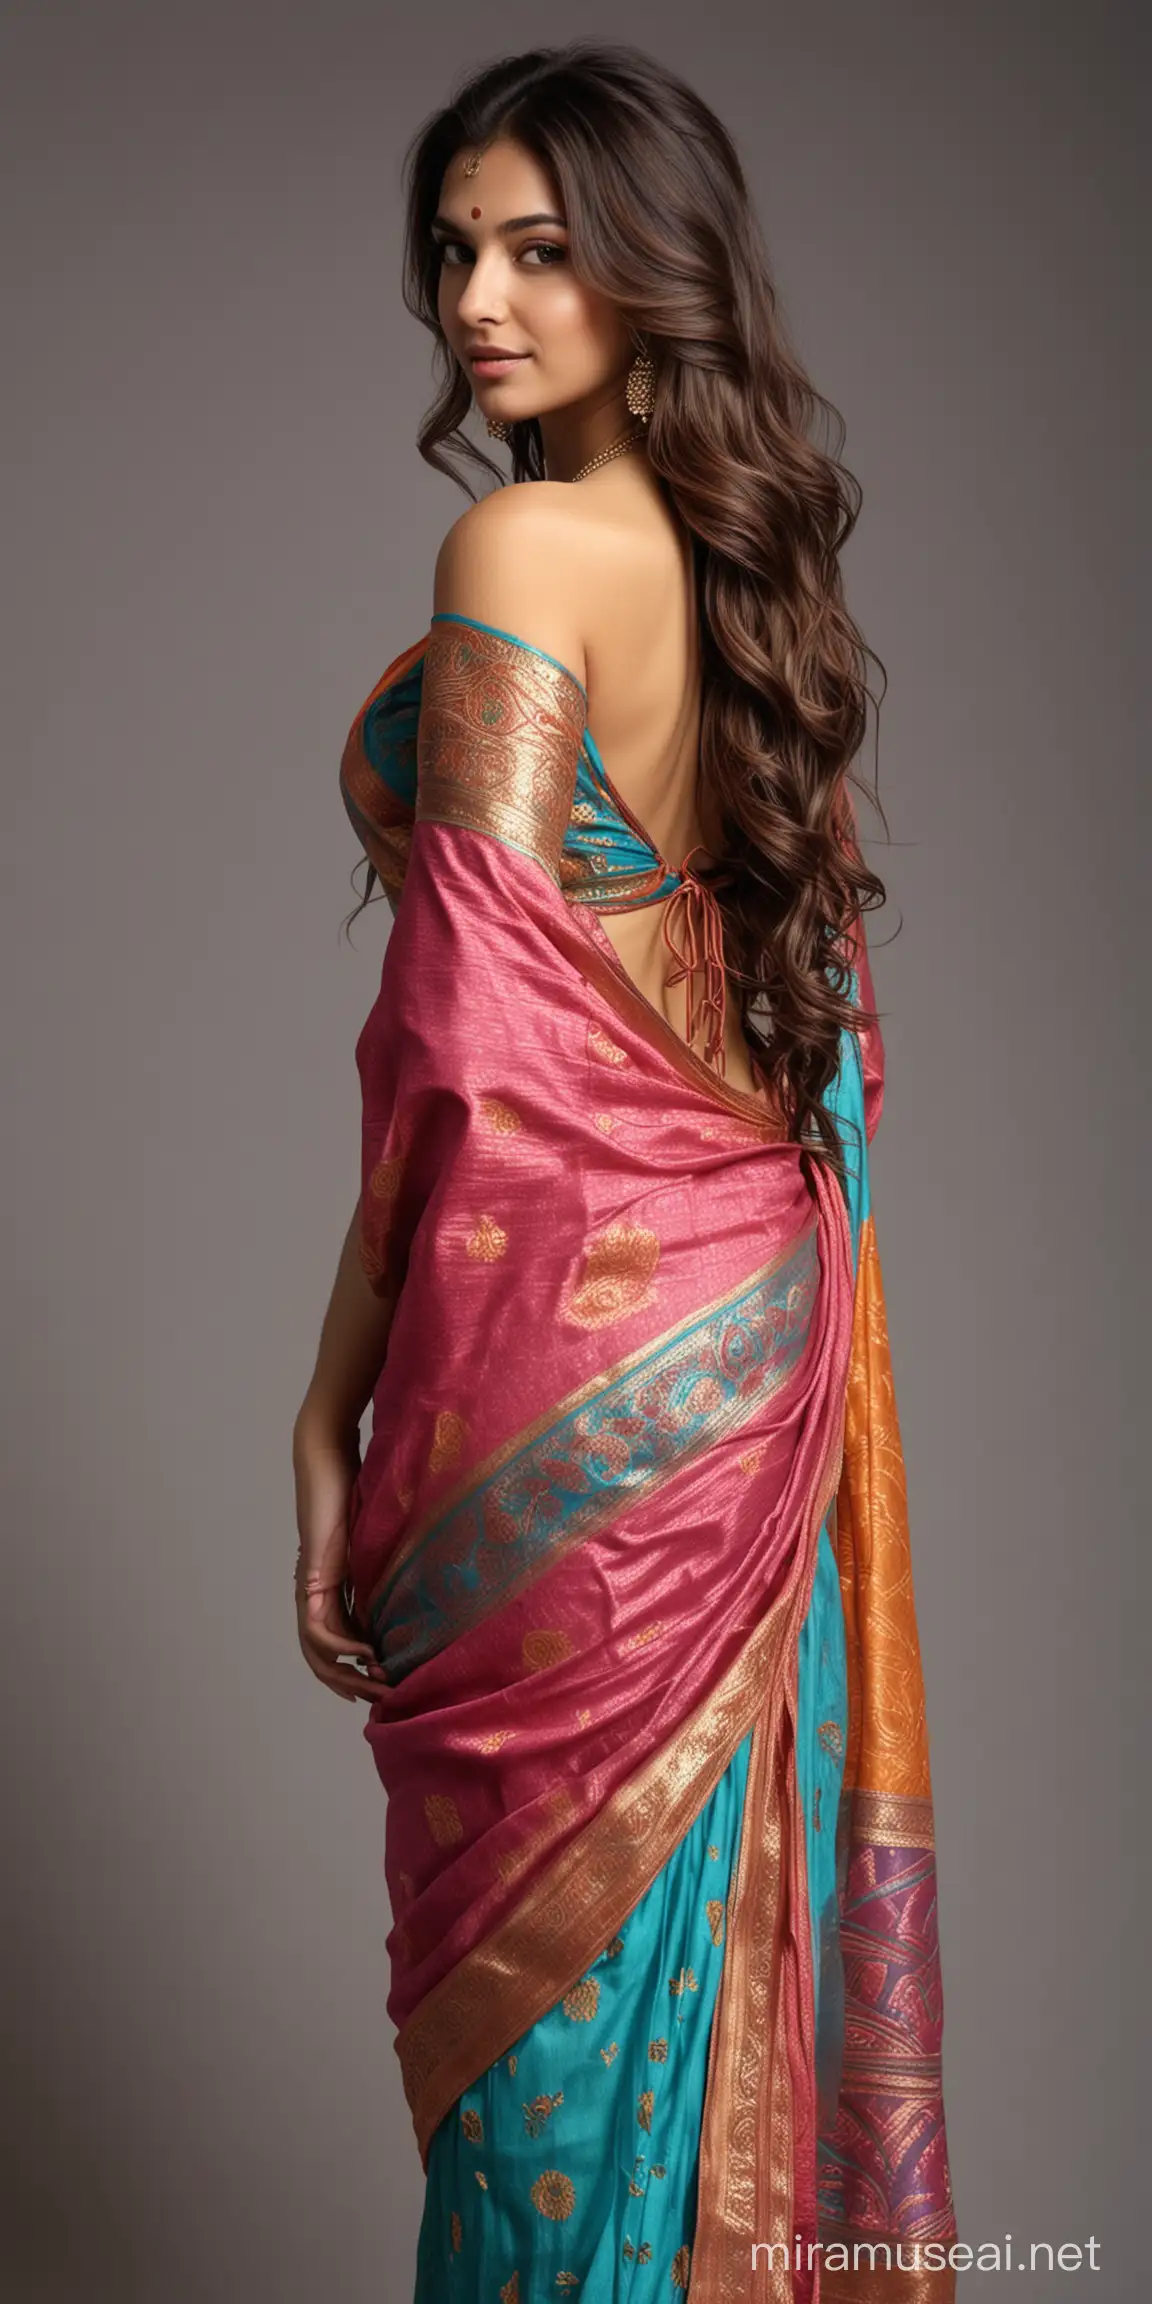 full body portrait photo of most beautiful European girl as beautiful Indian girl, thick   long wavy hair, elegant beautiful thick colorful SAREE look from back, tuned AWAY, very lowcut back with knot, showing back and buttocks, looking back over shoulders, brows raised with arrogance, photo realistic, 4k.
